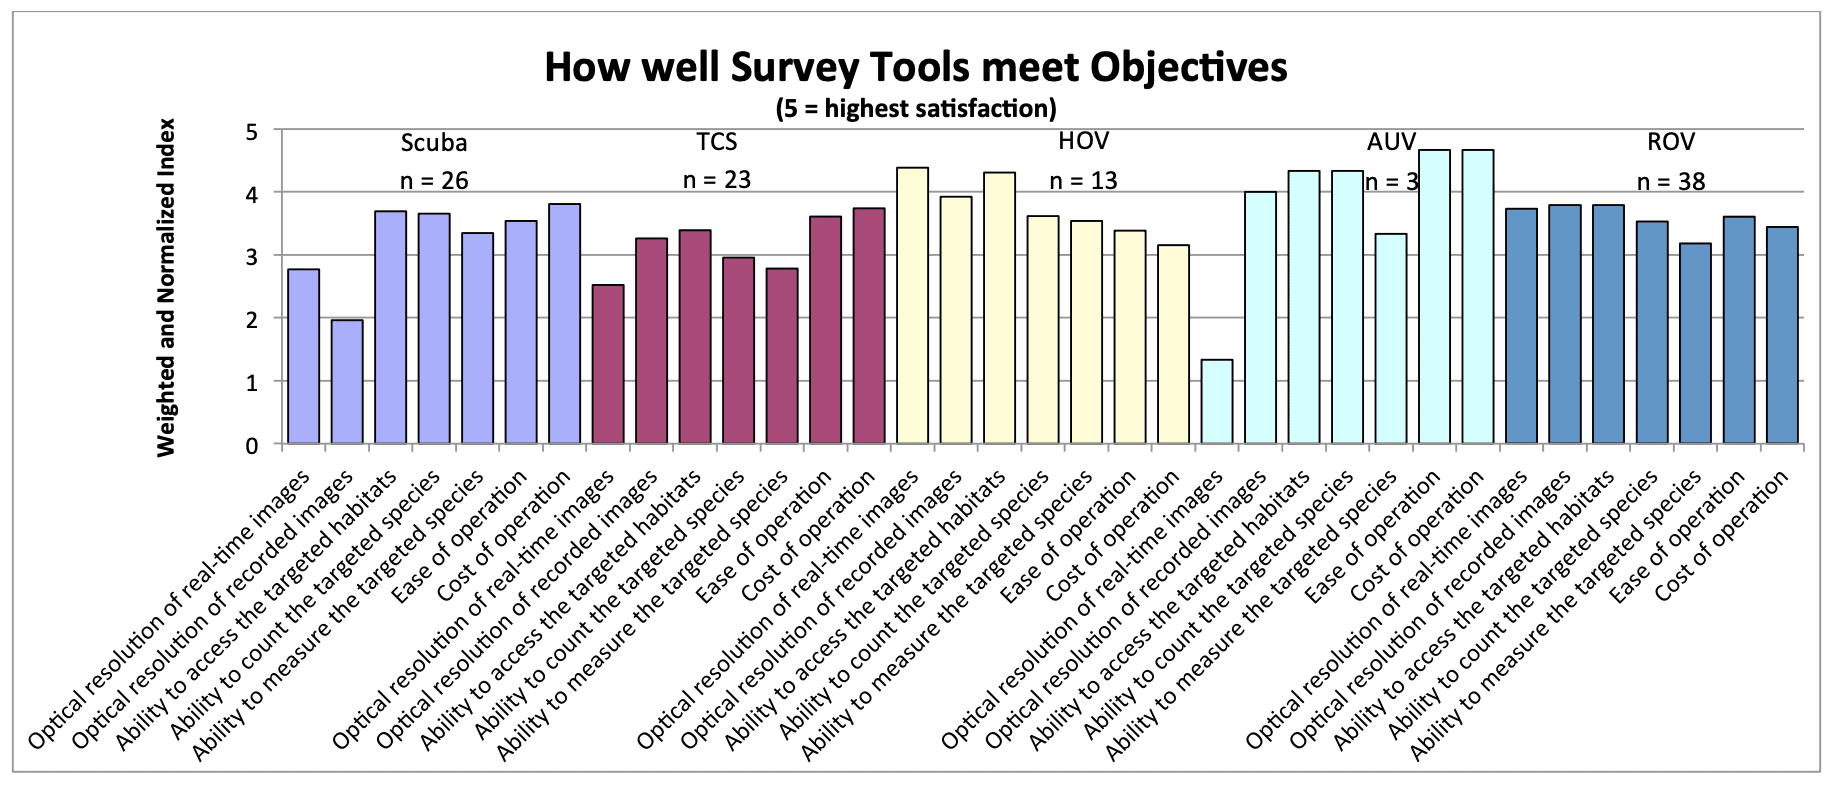 June 2015 - A COMPARATIVE ASSESSMENT OF UNDERWATER VISUAL SURVEY TOOLS: 123